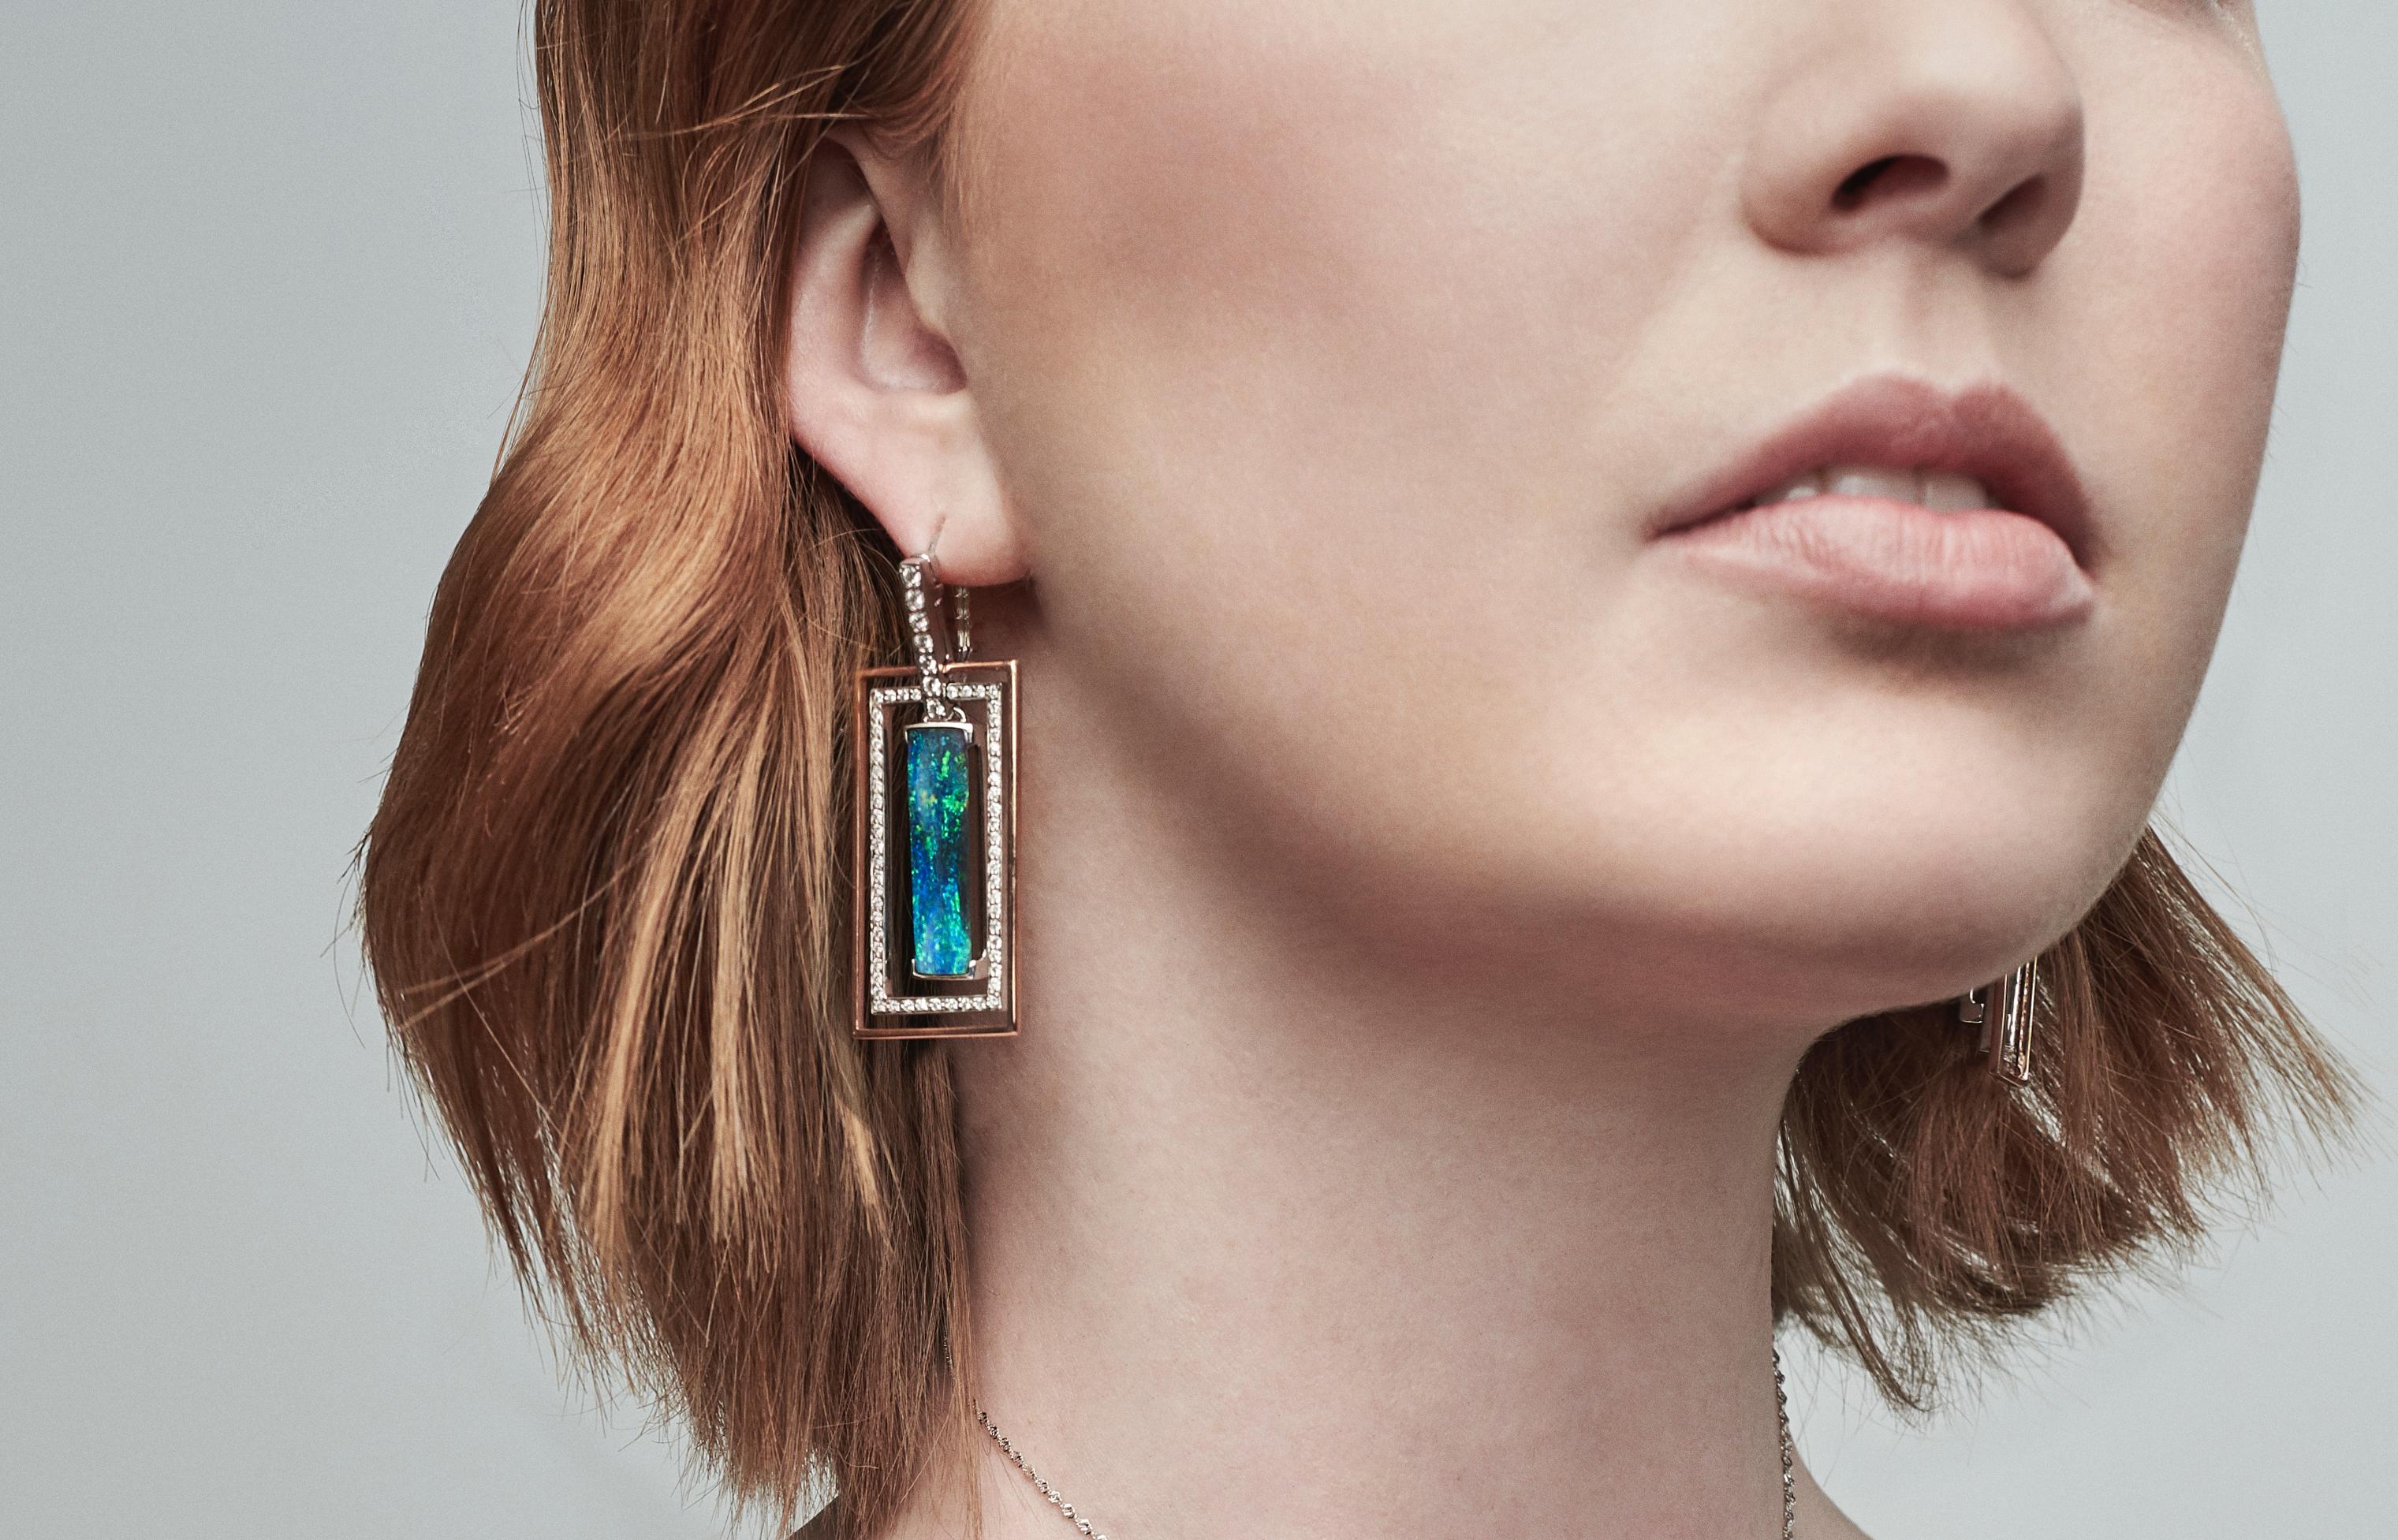 “E=mc2” opal earrings were inspired by the shifting paradigms of modern physics. Striking boulder opals (18.73ct) from Winton are complemented by their geometric 18K white and rose gold setting. What sets this striking pair apart is the capacity to